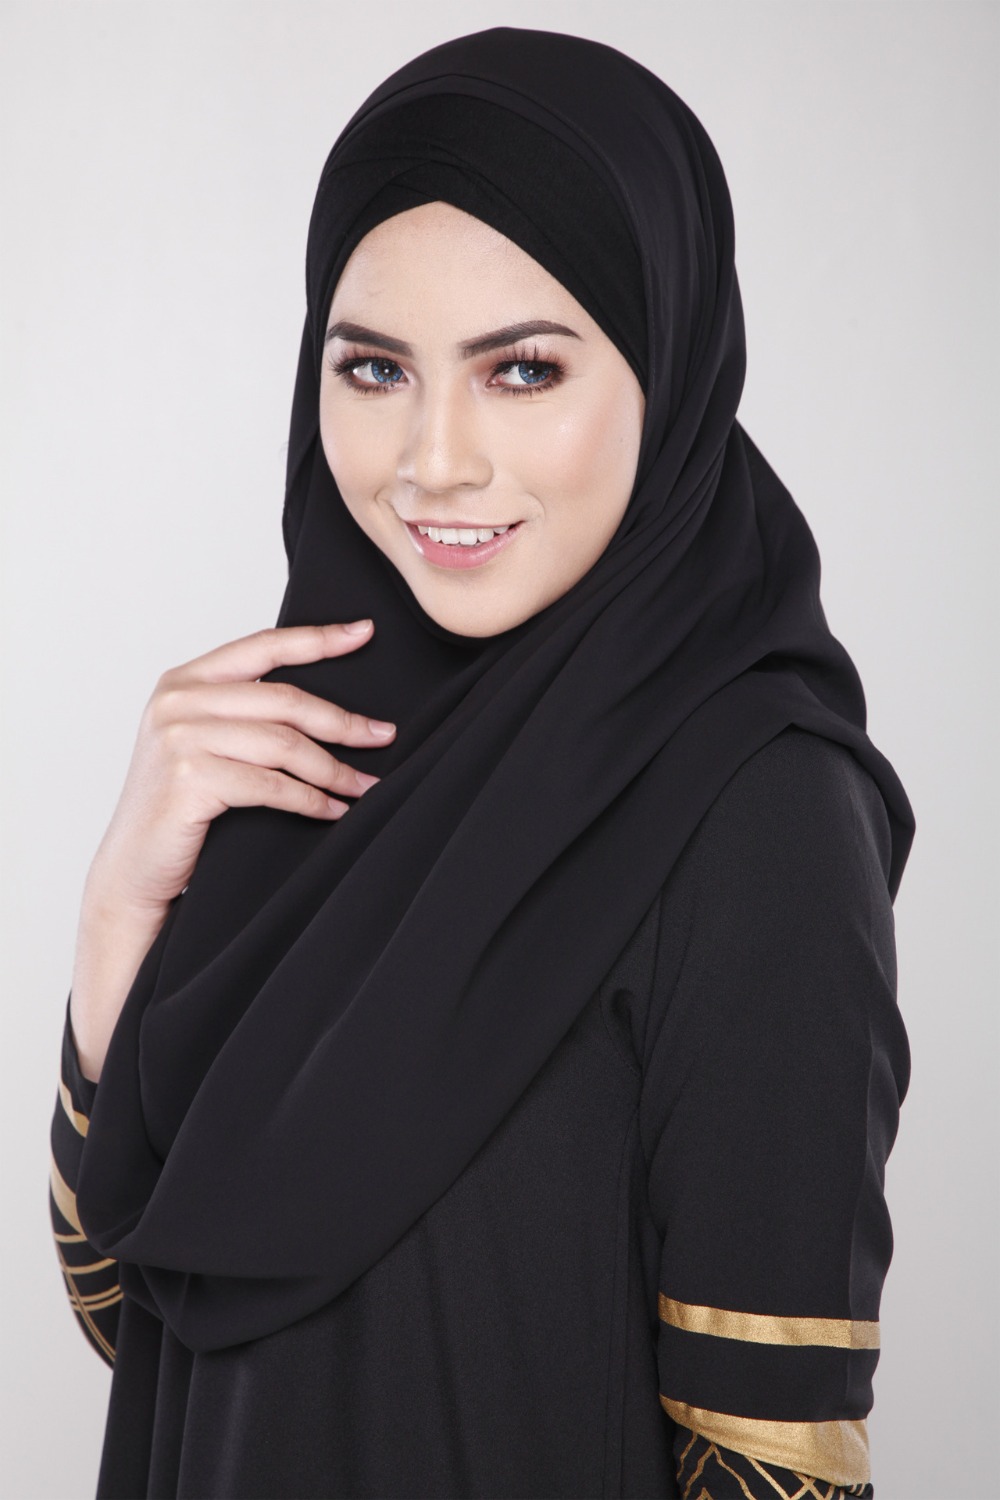 Online Buy Wholesale Hijab Indonesia From China Hijab